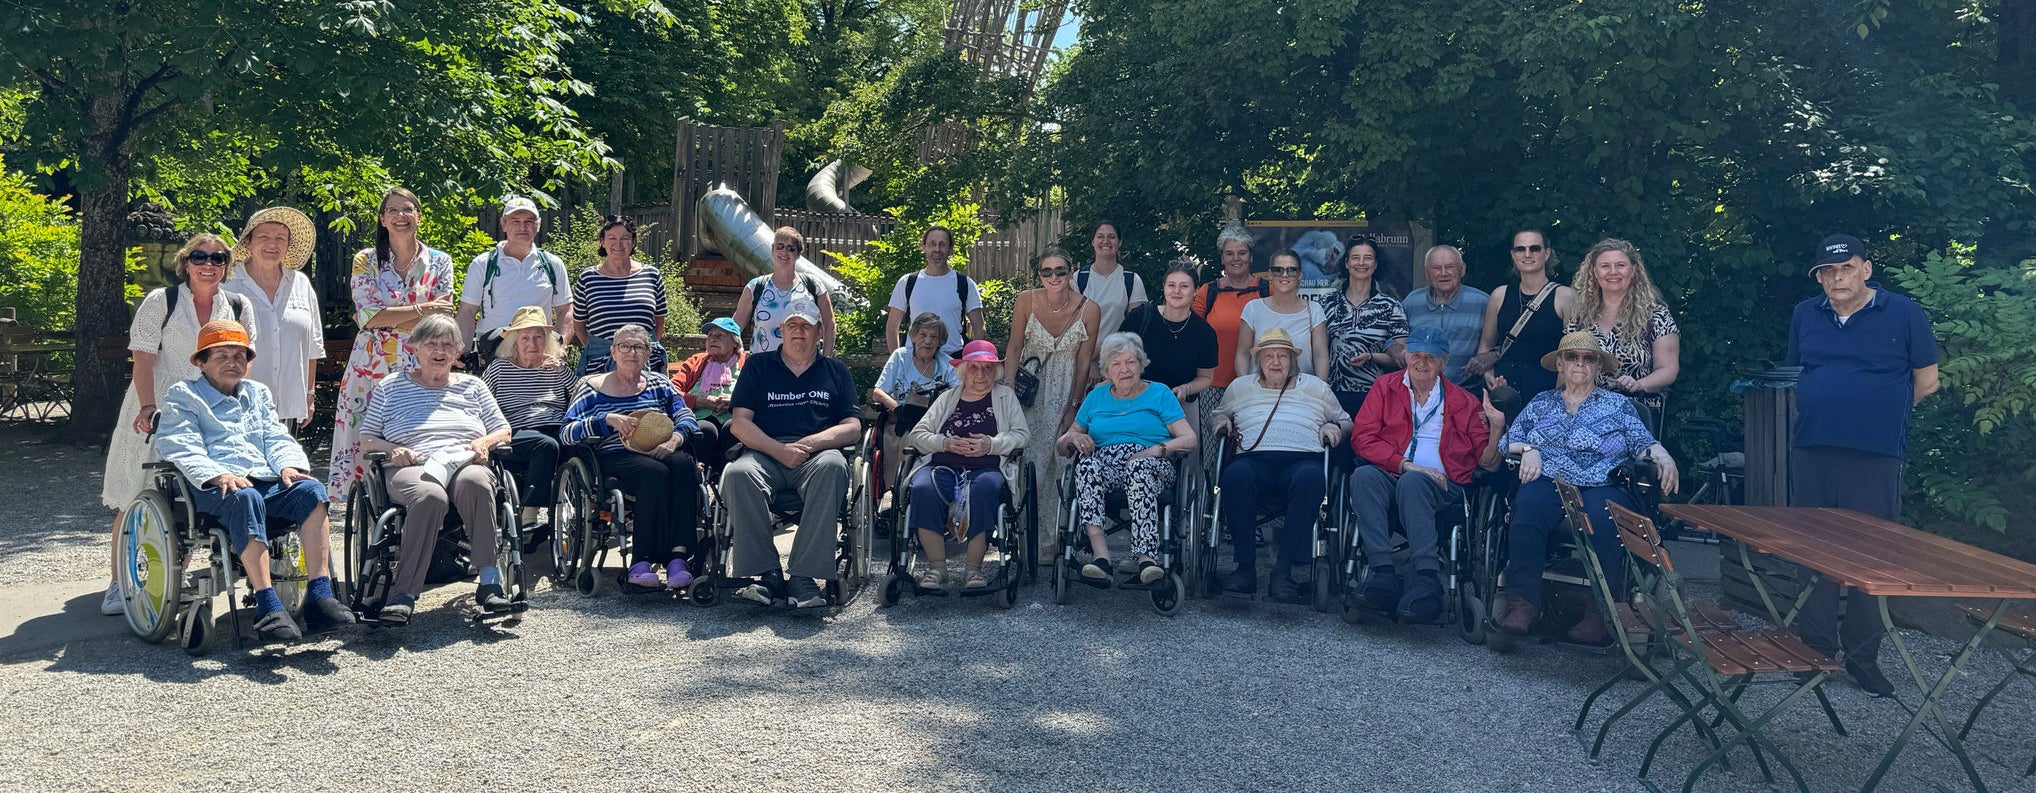 During Webasto Social Week, 14 residents from Münchenstift, along with their companions, enjoyed a sunny afternoon at Hellabrunn Zoo in Munich, Germany.